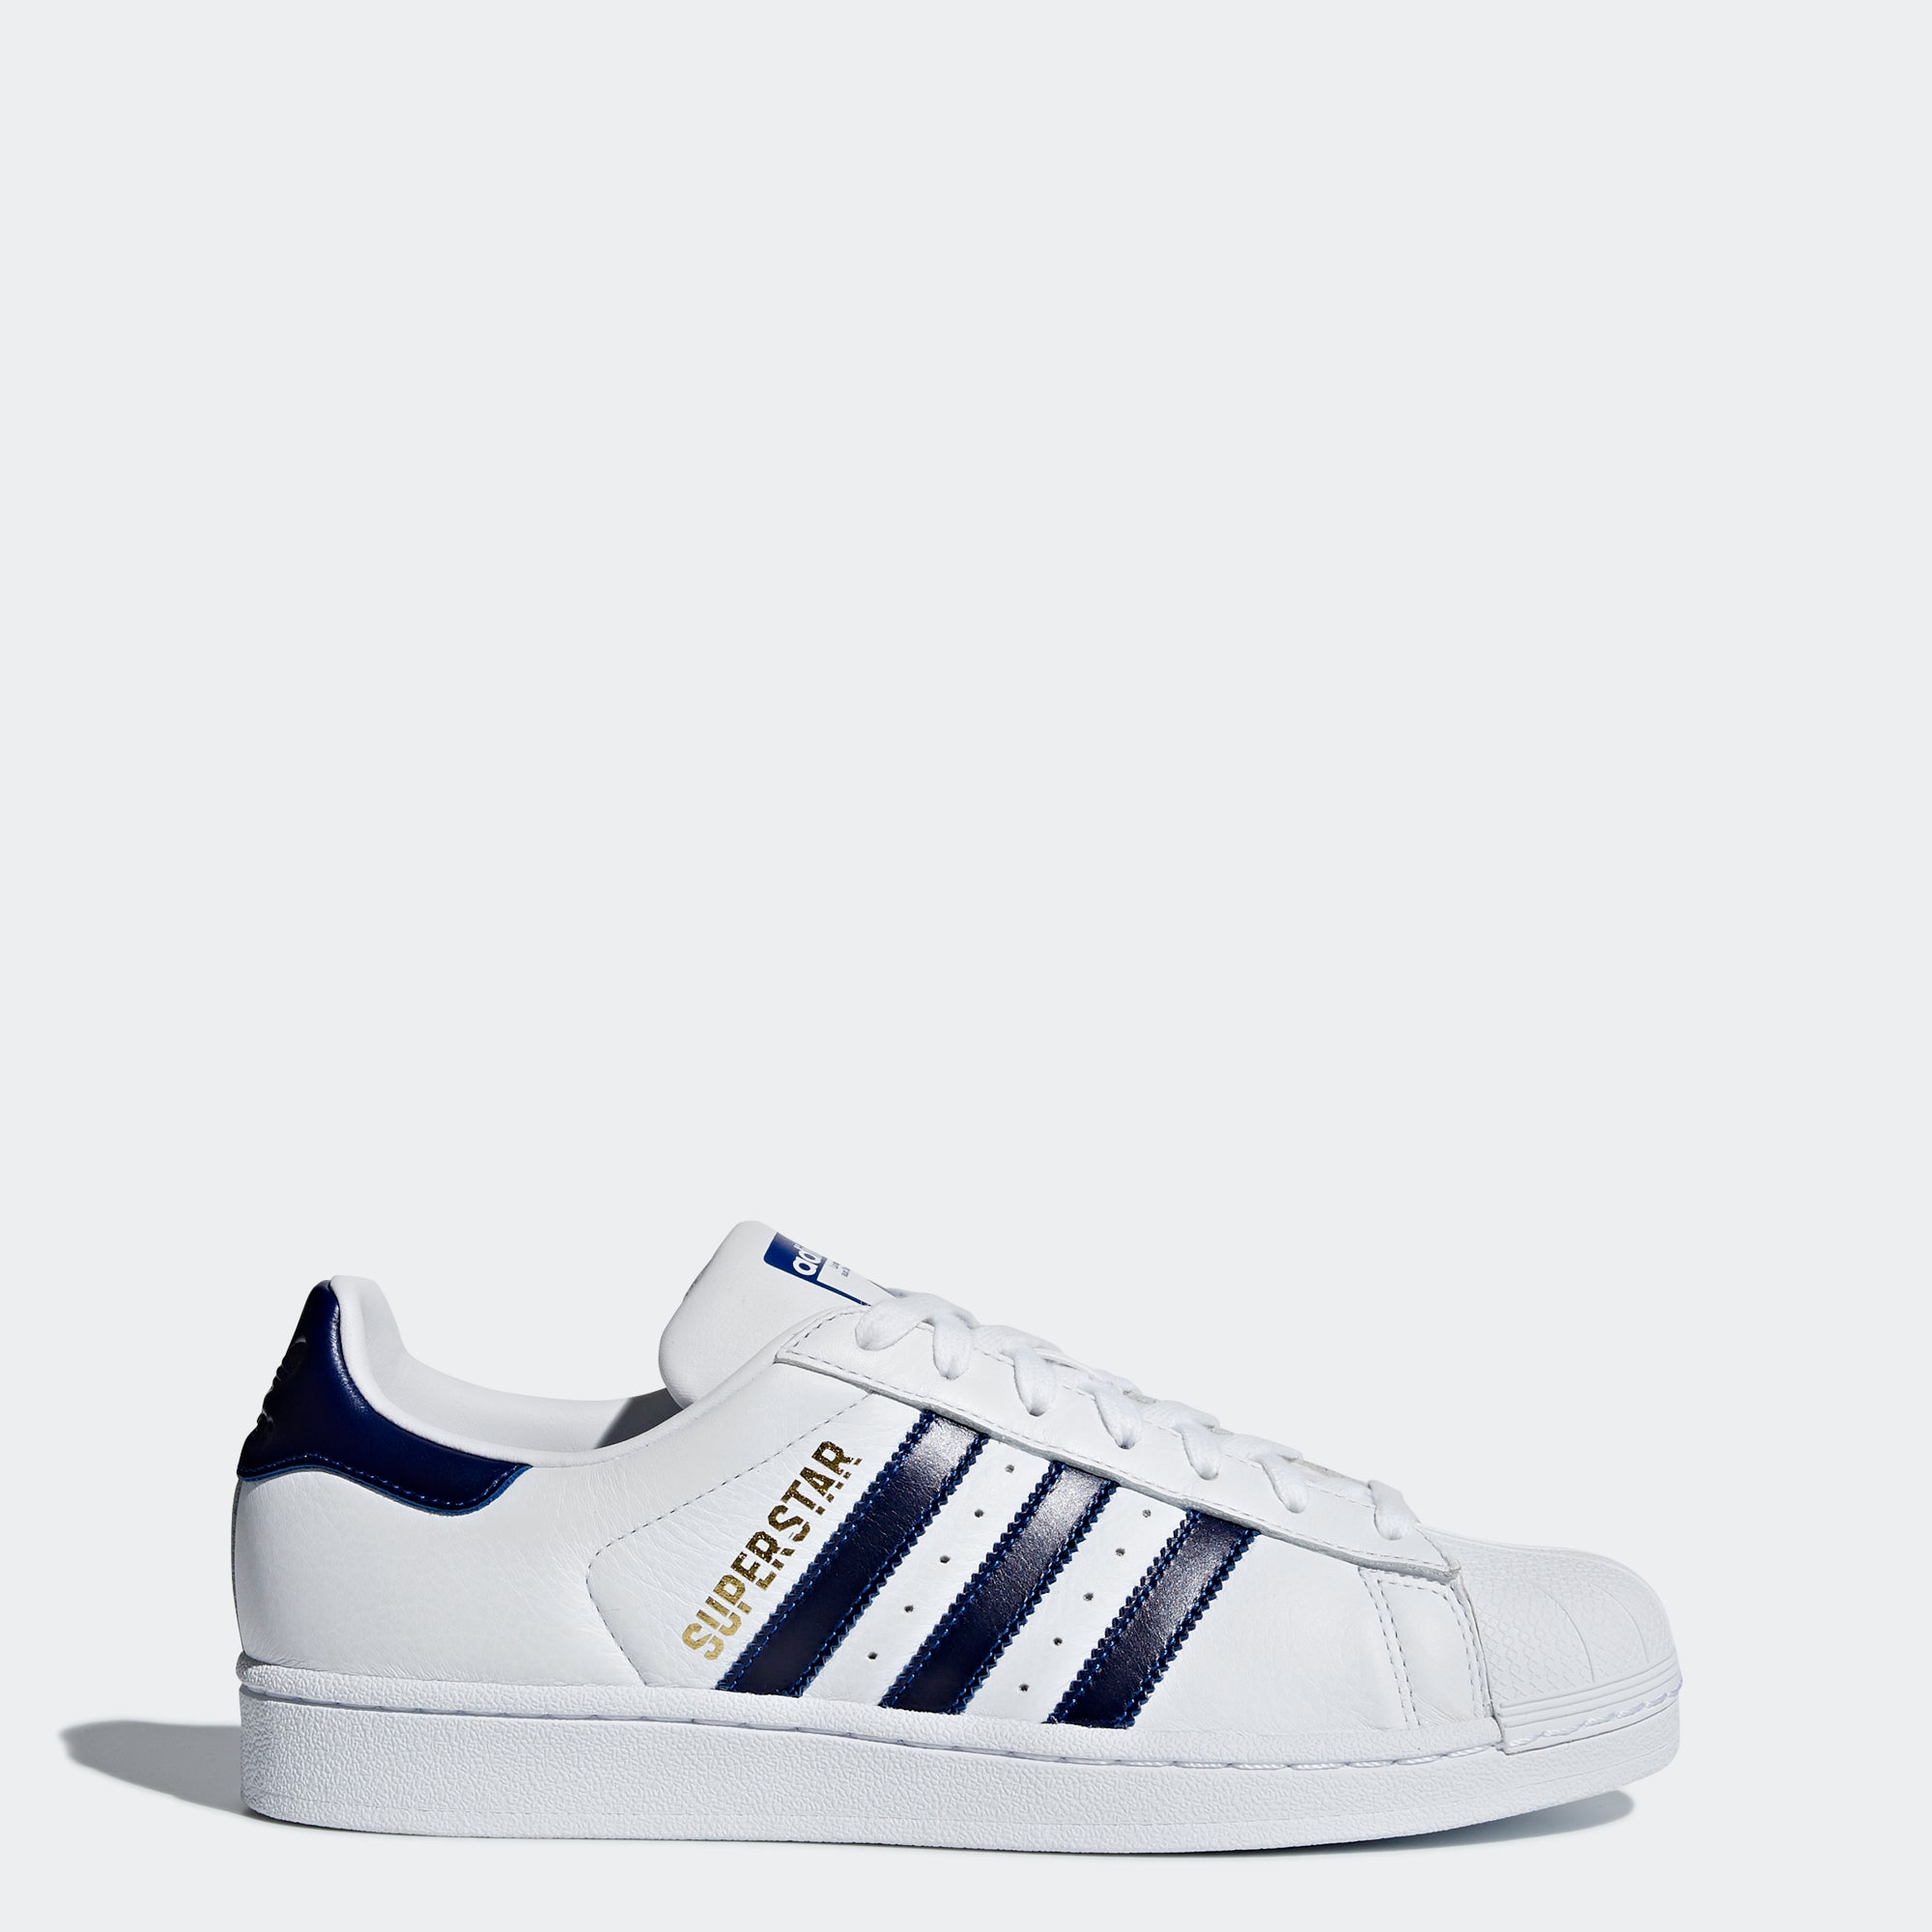 adidas superstar mens white and navy